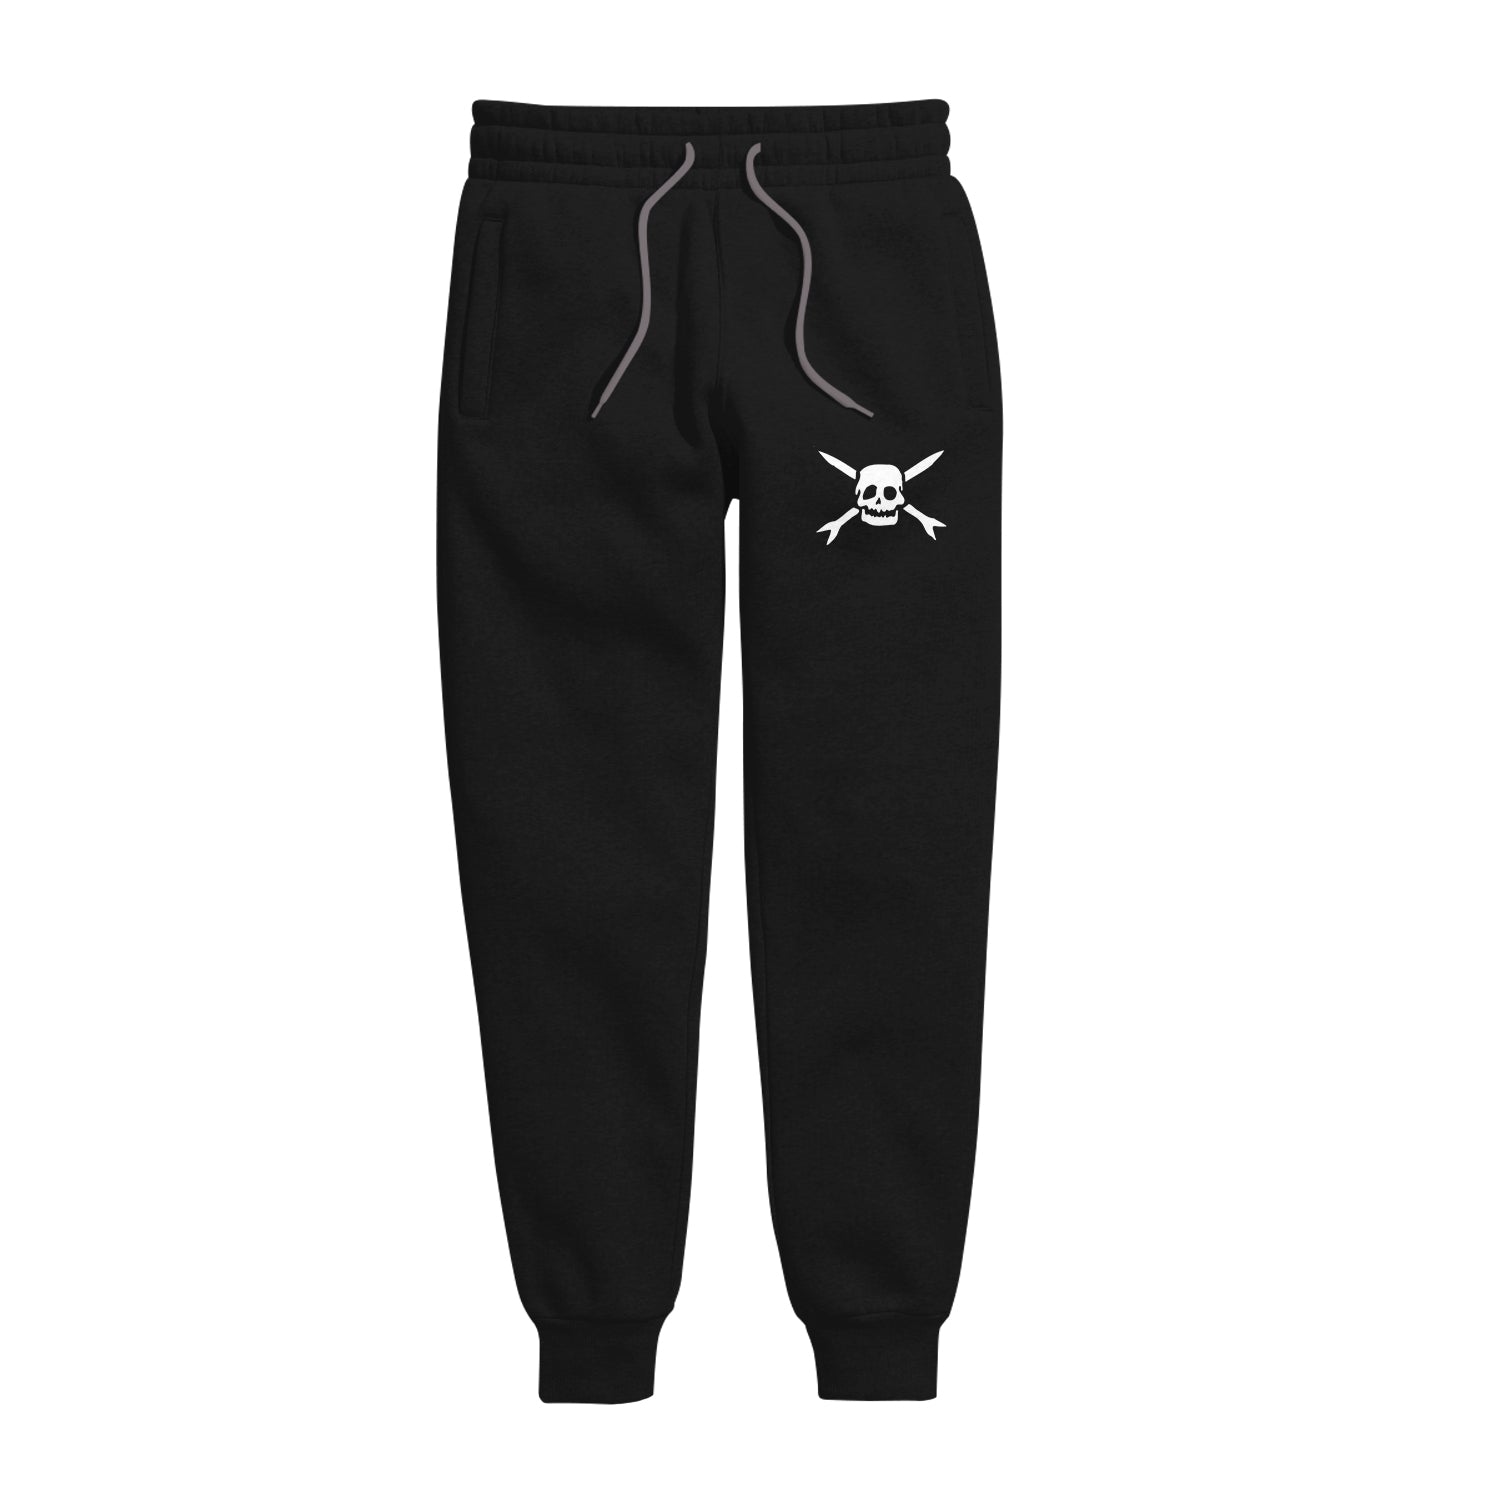 Photo of black jogger pants against a white background. The strings are a white/grey color. The left upper thigh features the teenage bottlerocket logo in white. The logo is a skull head with cross arrows.